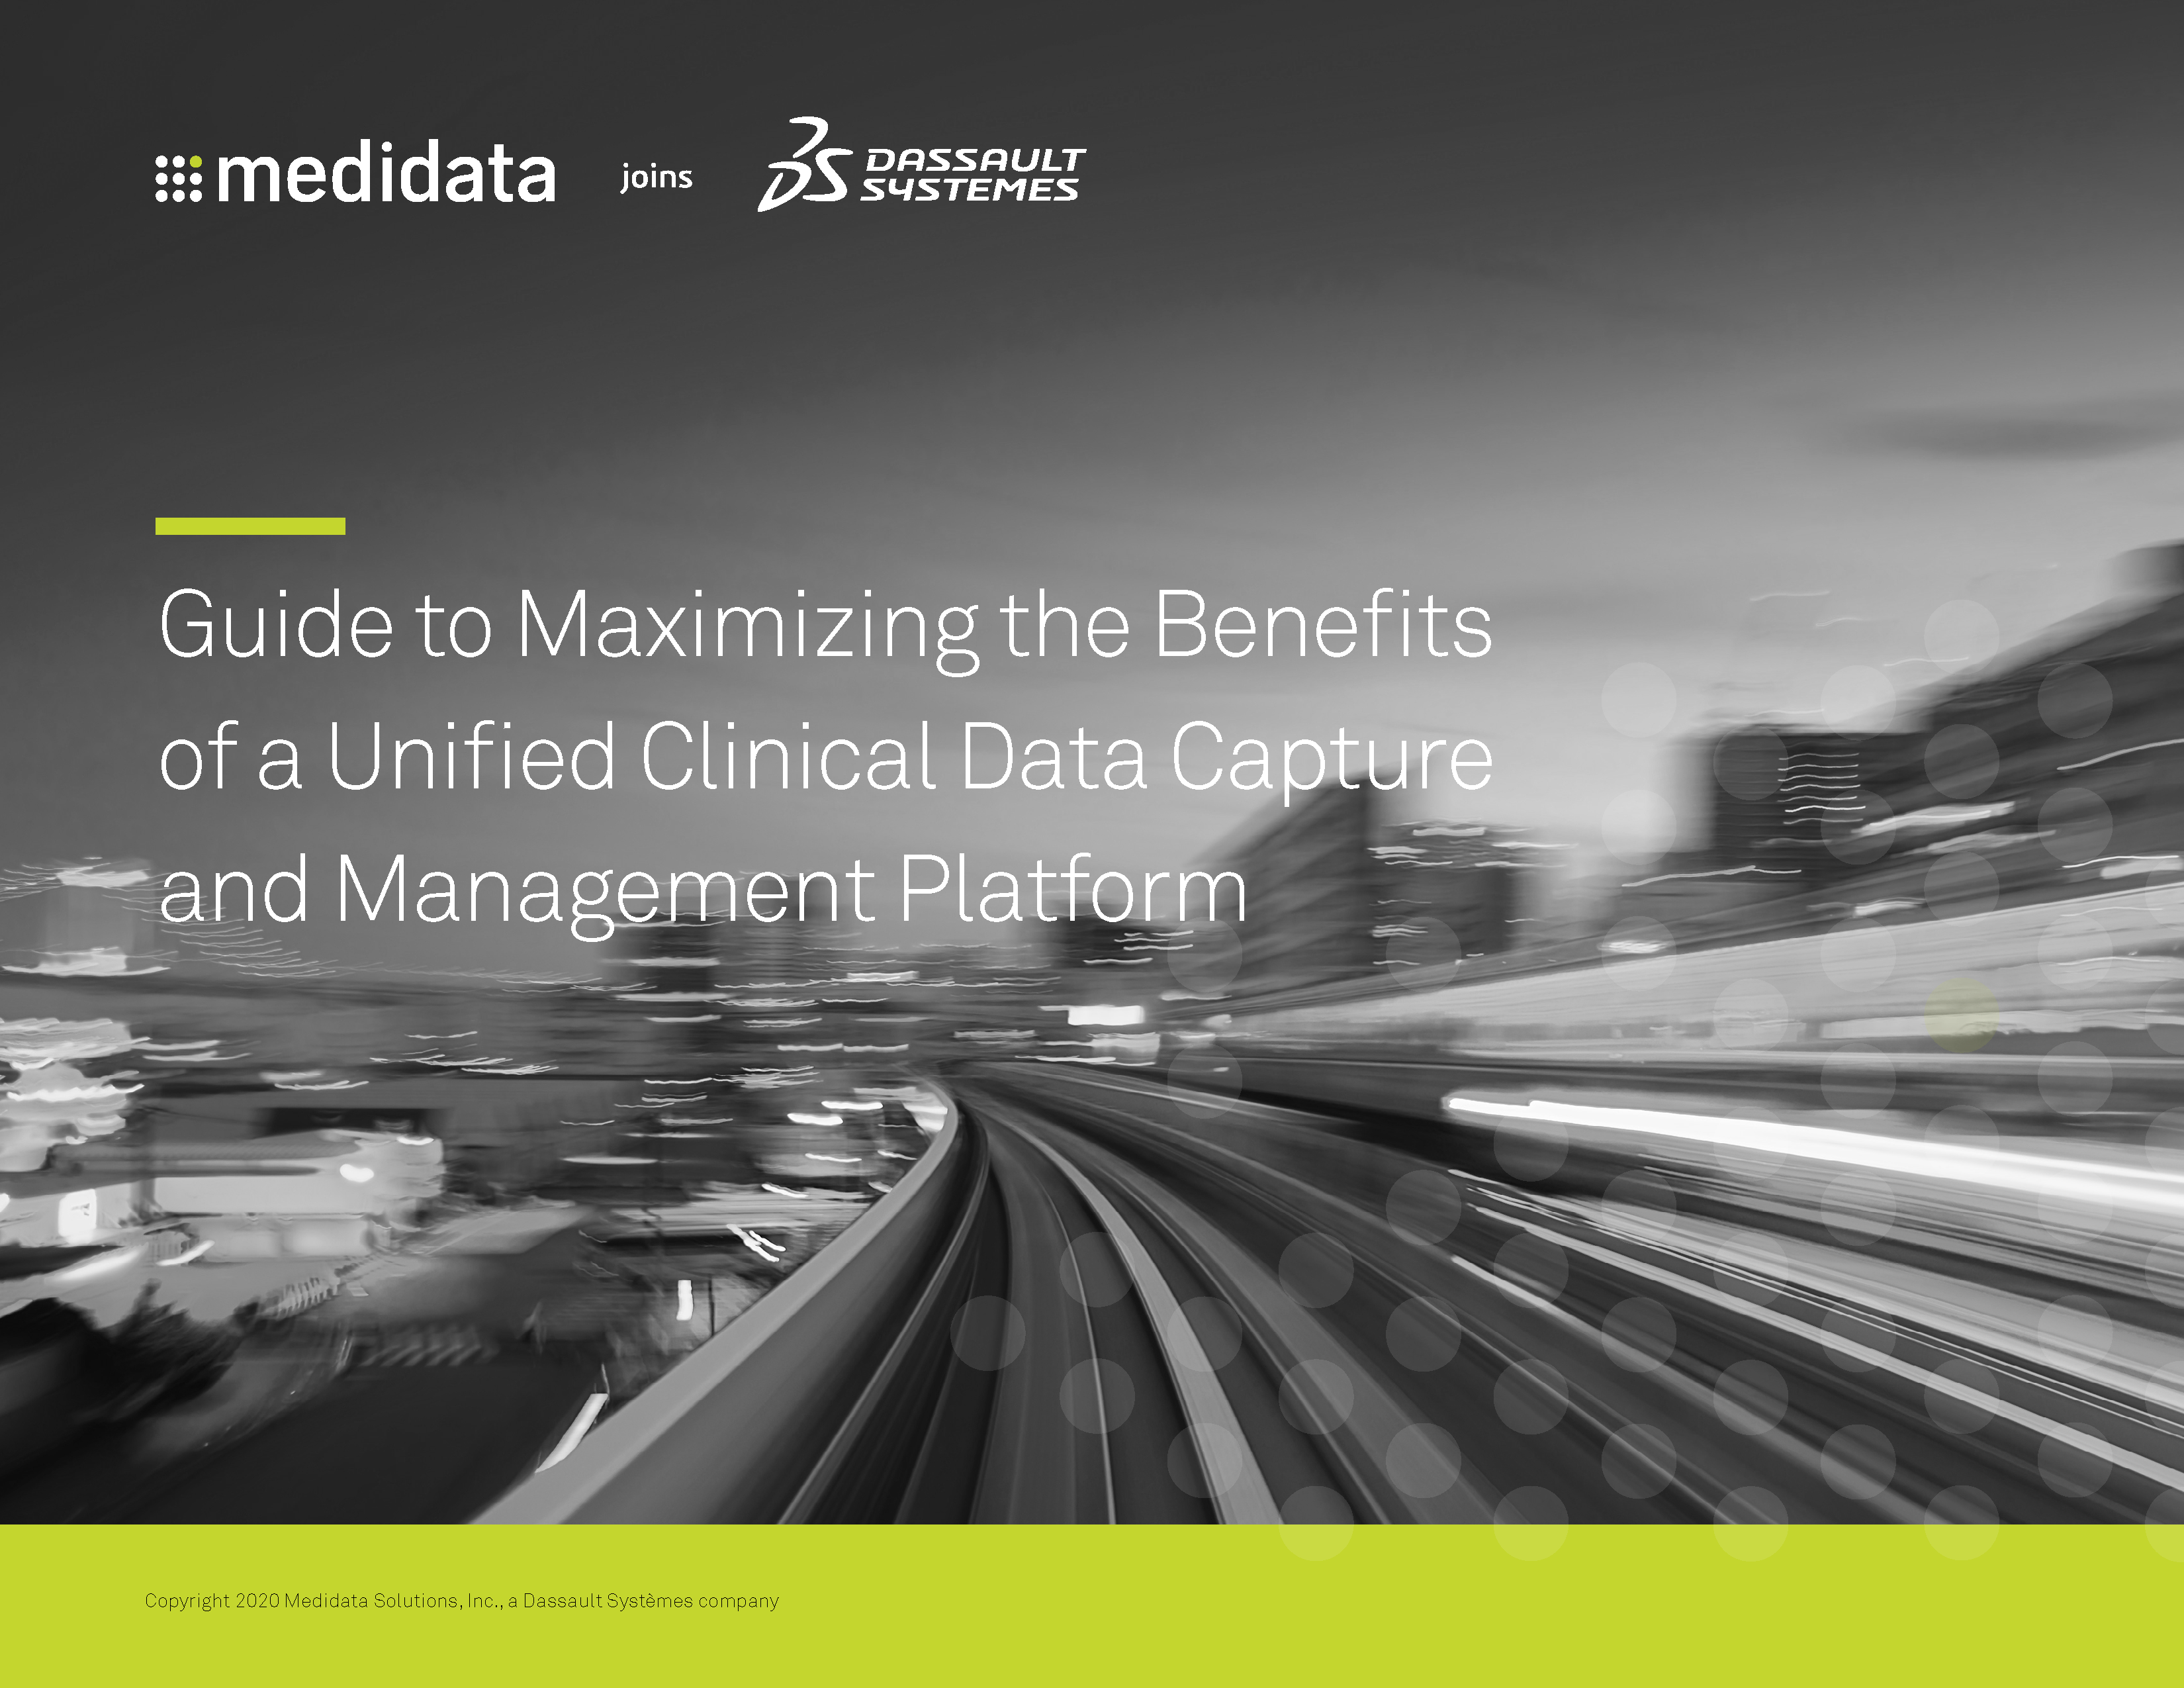 Guide to Maximizing the Benefits of a Unified Clinical Data Capture and Management Platform